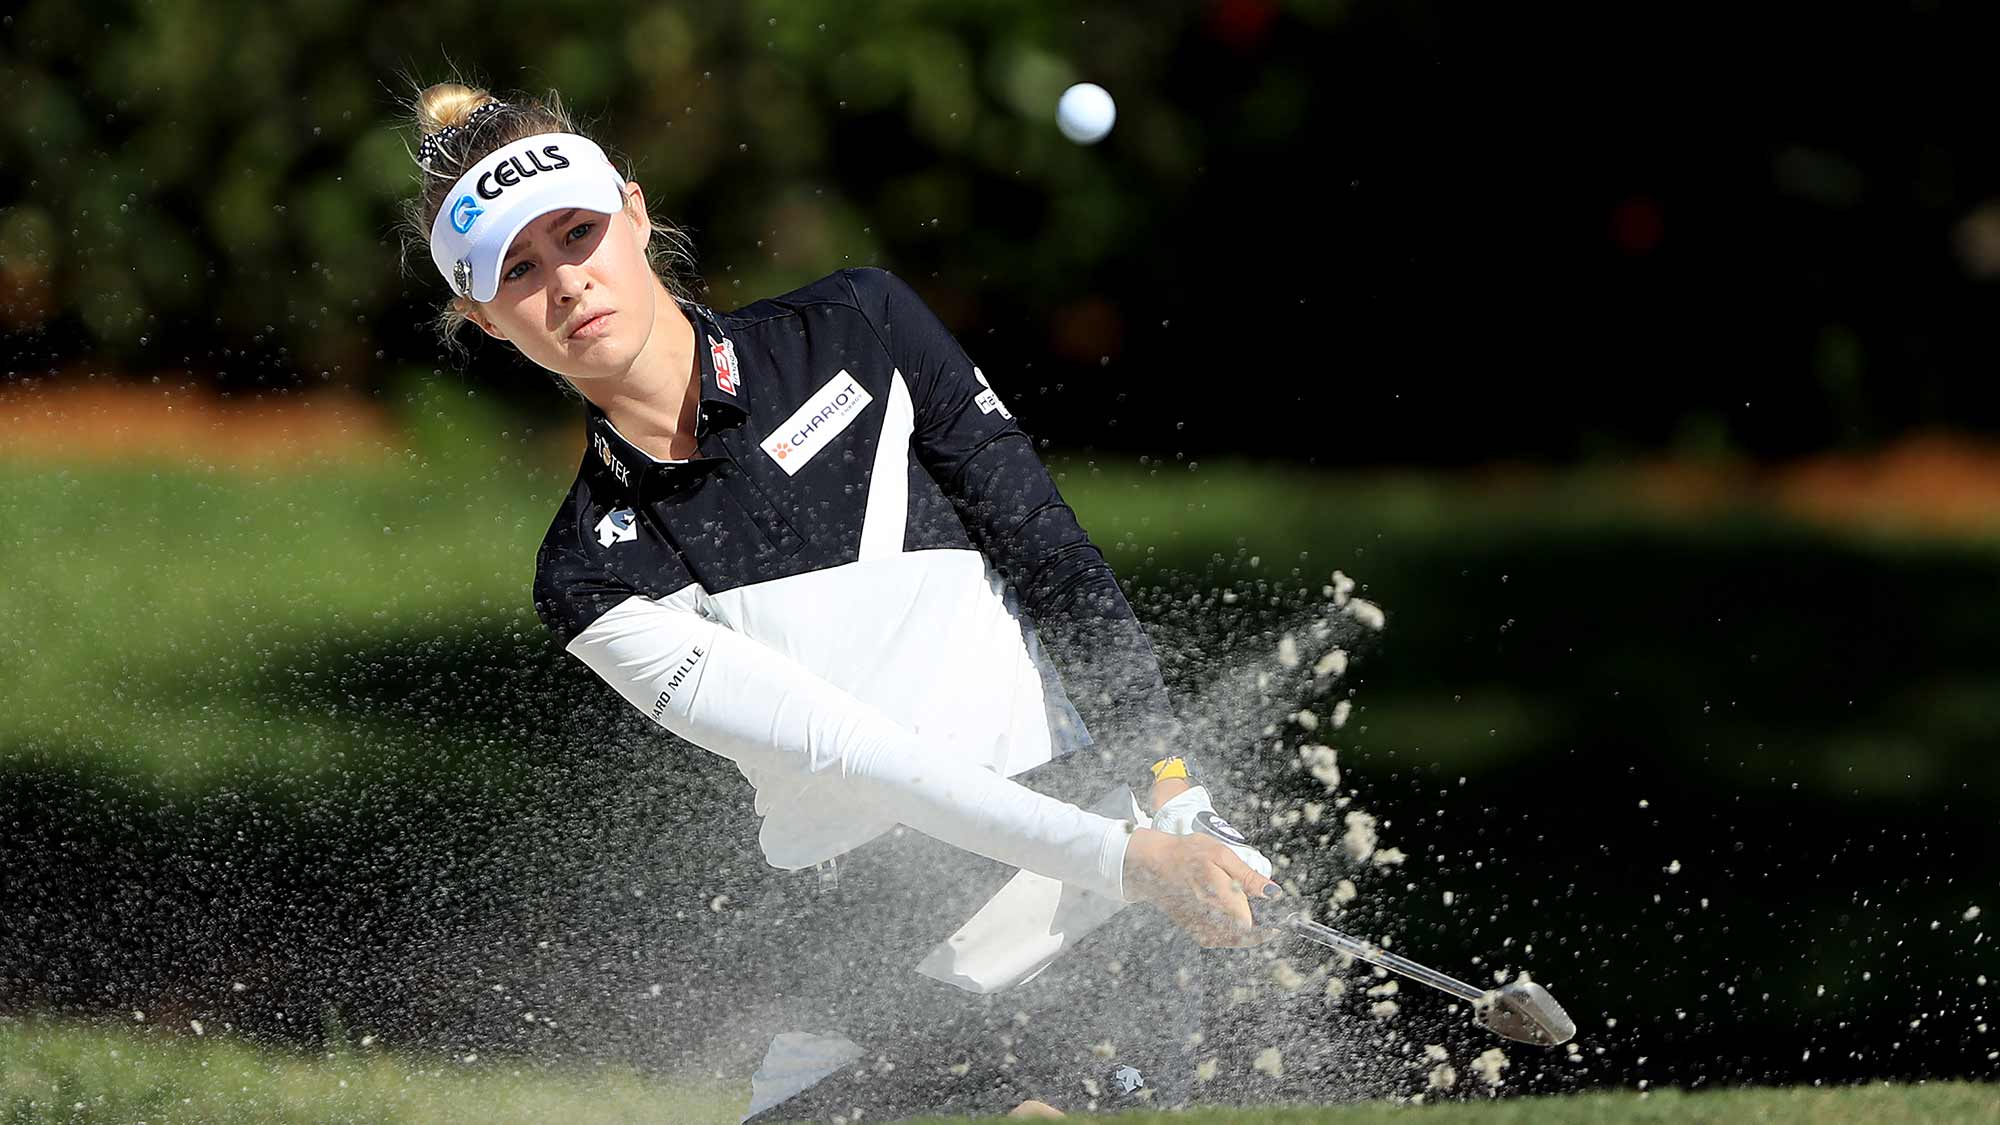 Nelly Korda of the United States plays a shot from a bunker on the sixth hole during the first round of the CME Group Tour Championship at Tiburon Golf Club on November 21, 2019 in Naples, Florida